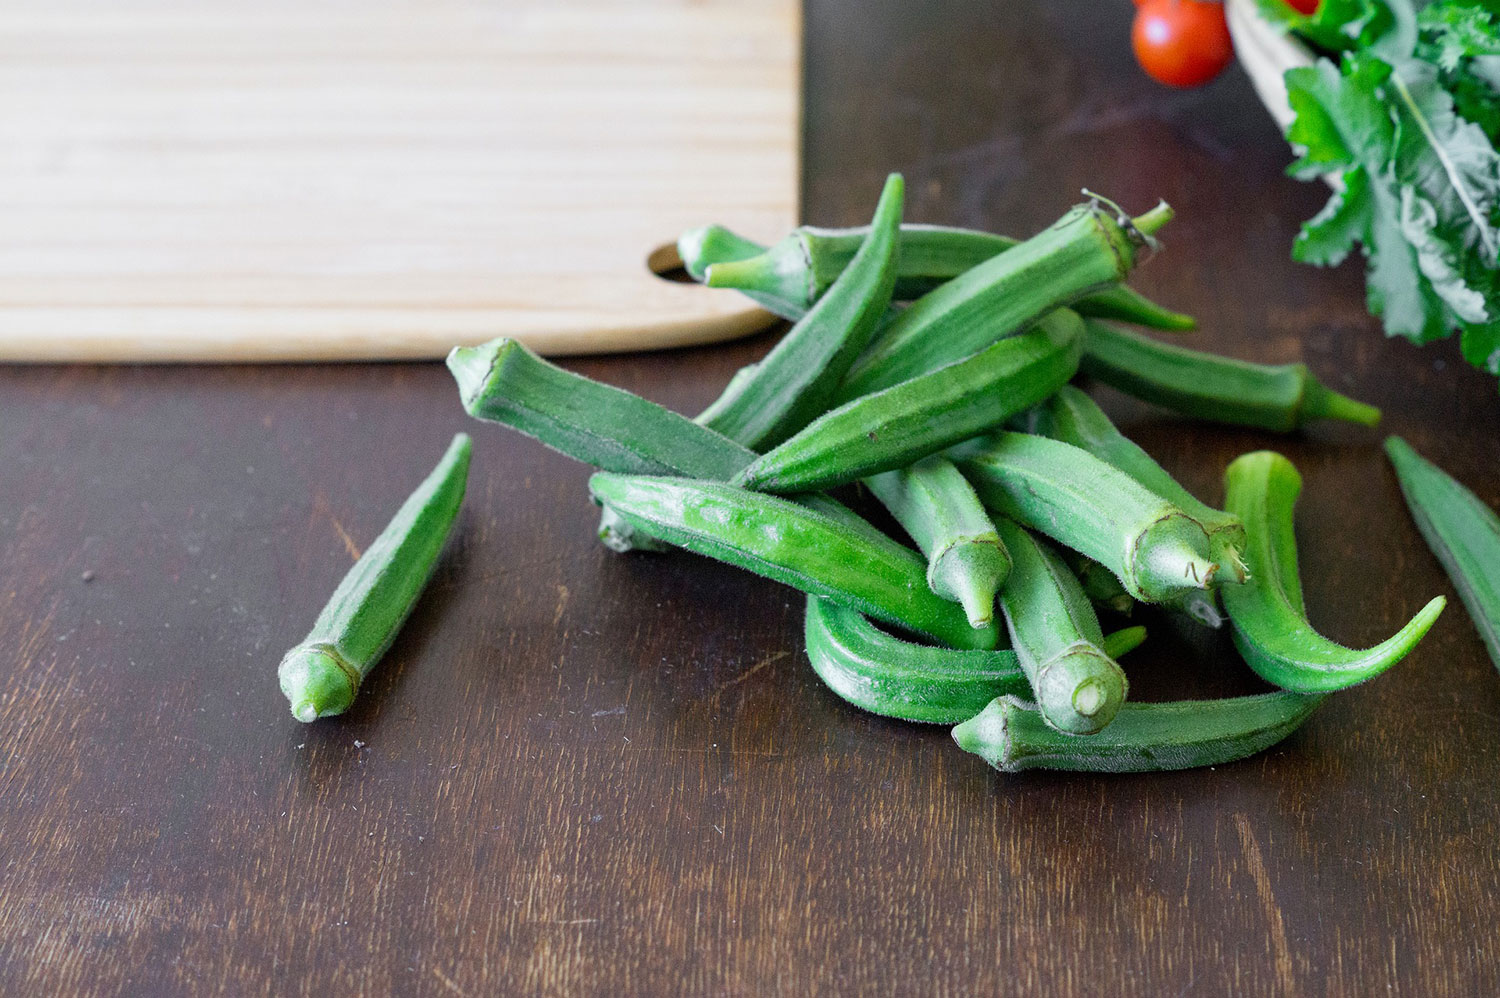 Goo made from okra can remove microplastics from water